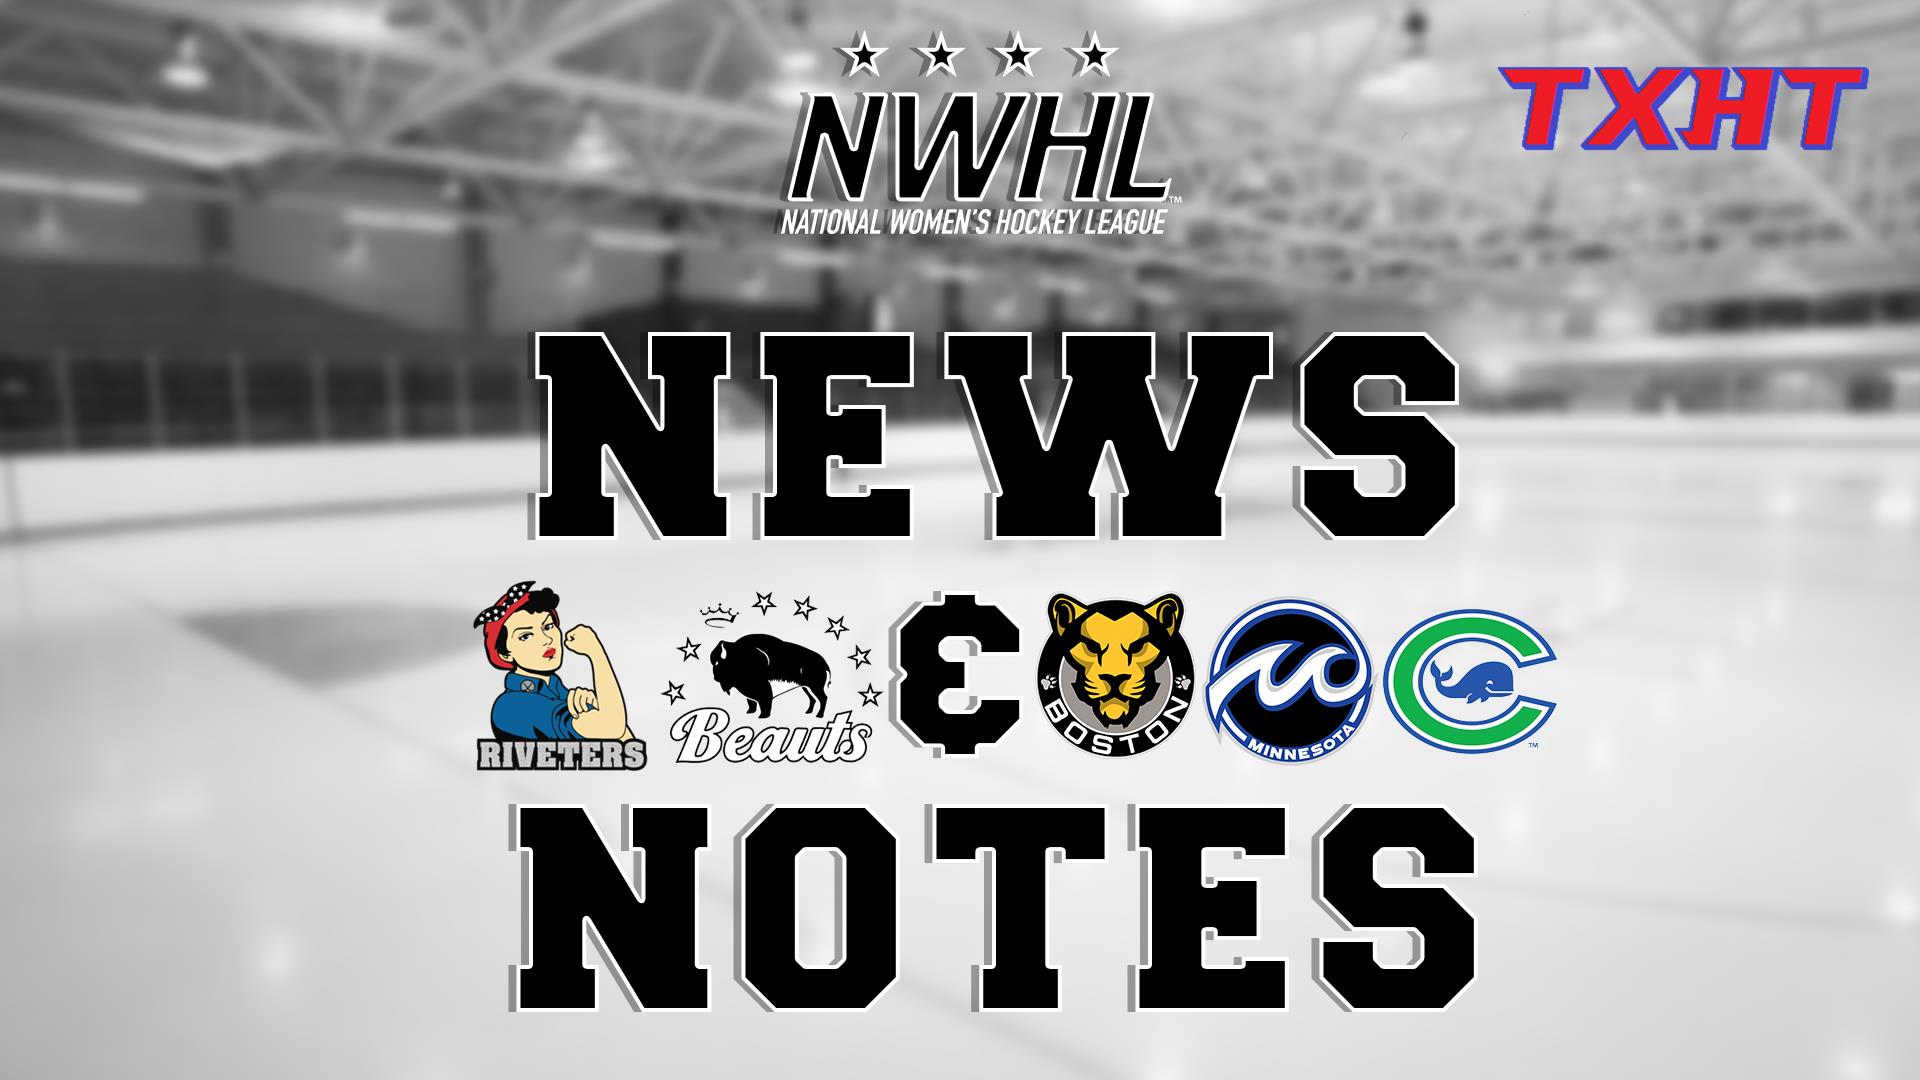 NWHL News and Notes 2